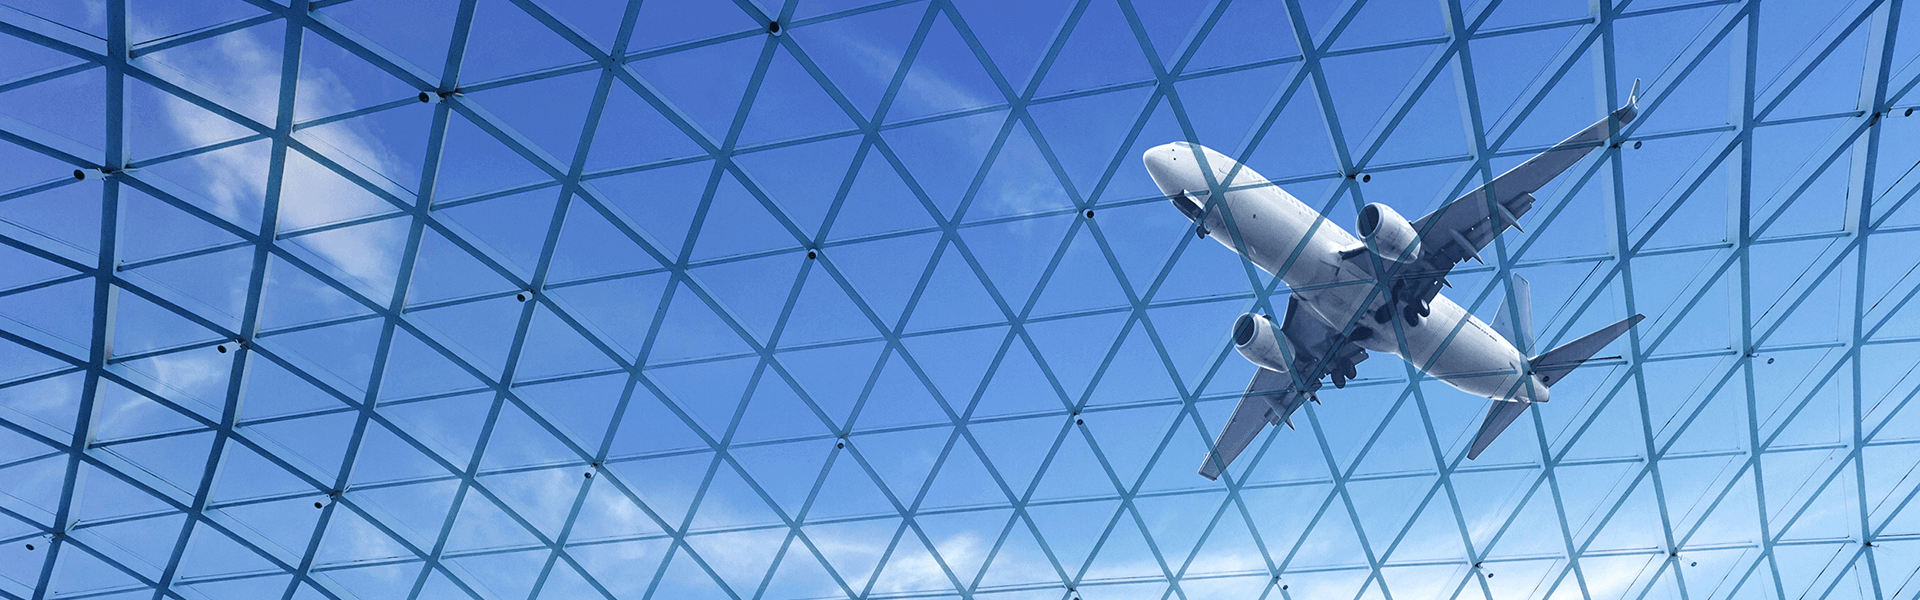 Plane flying above a glass ceiling